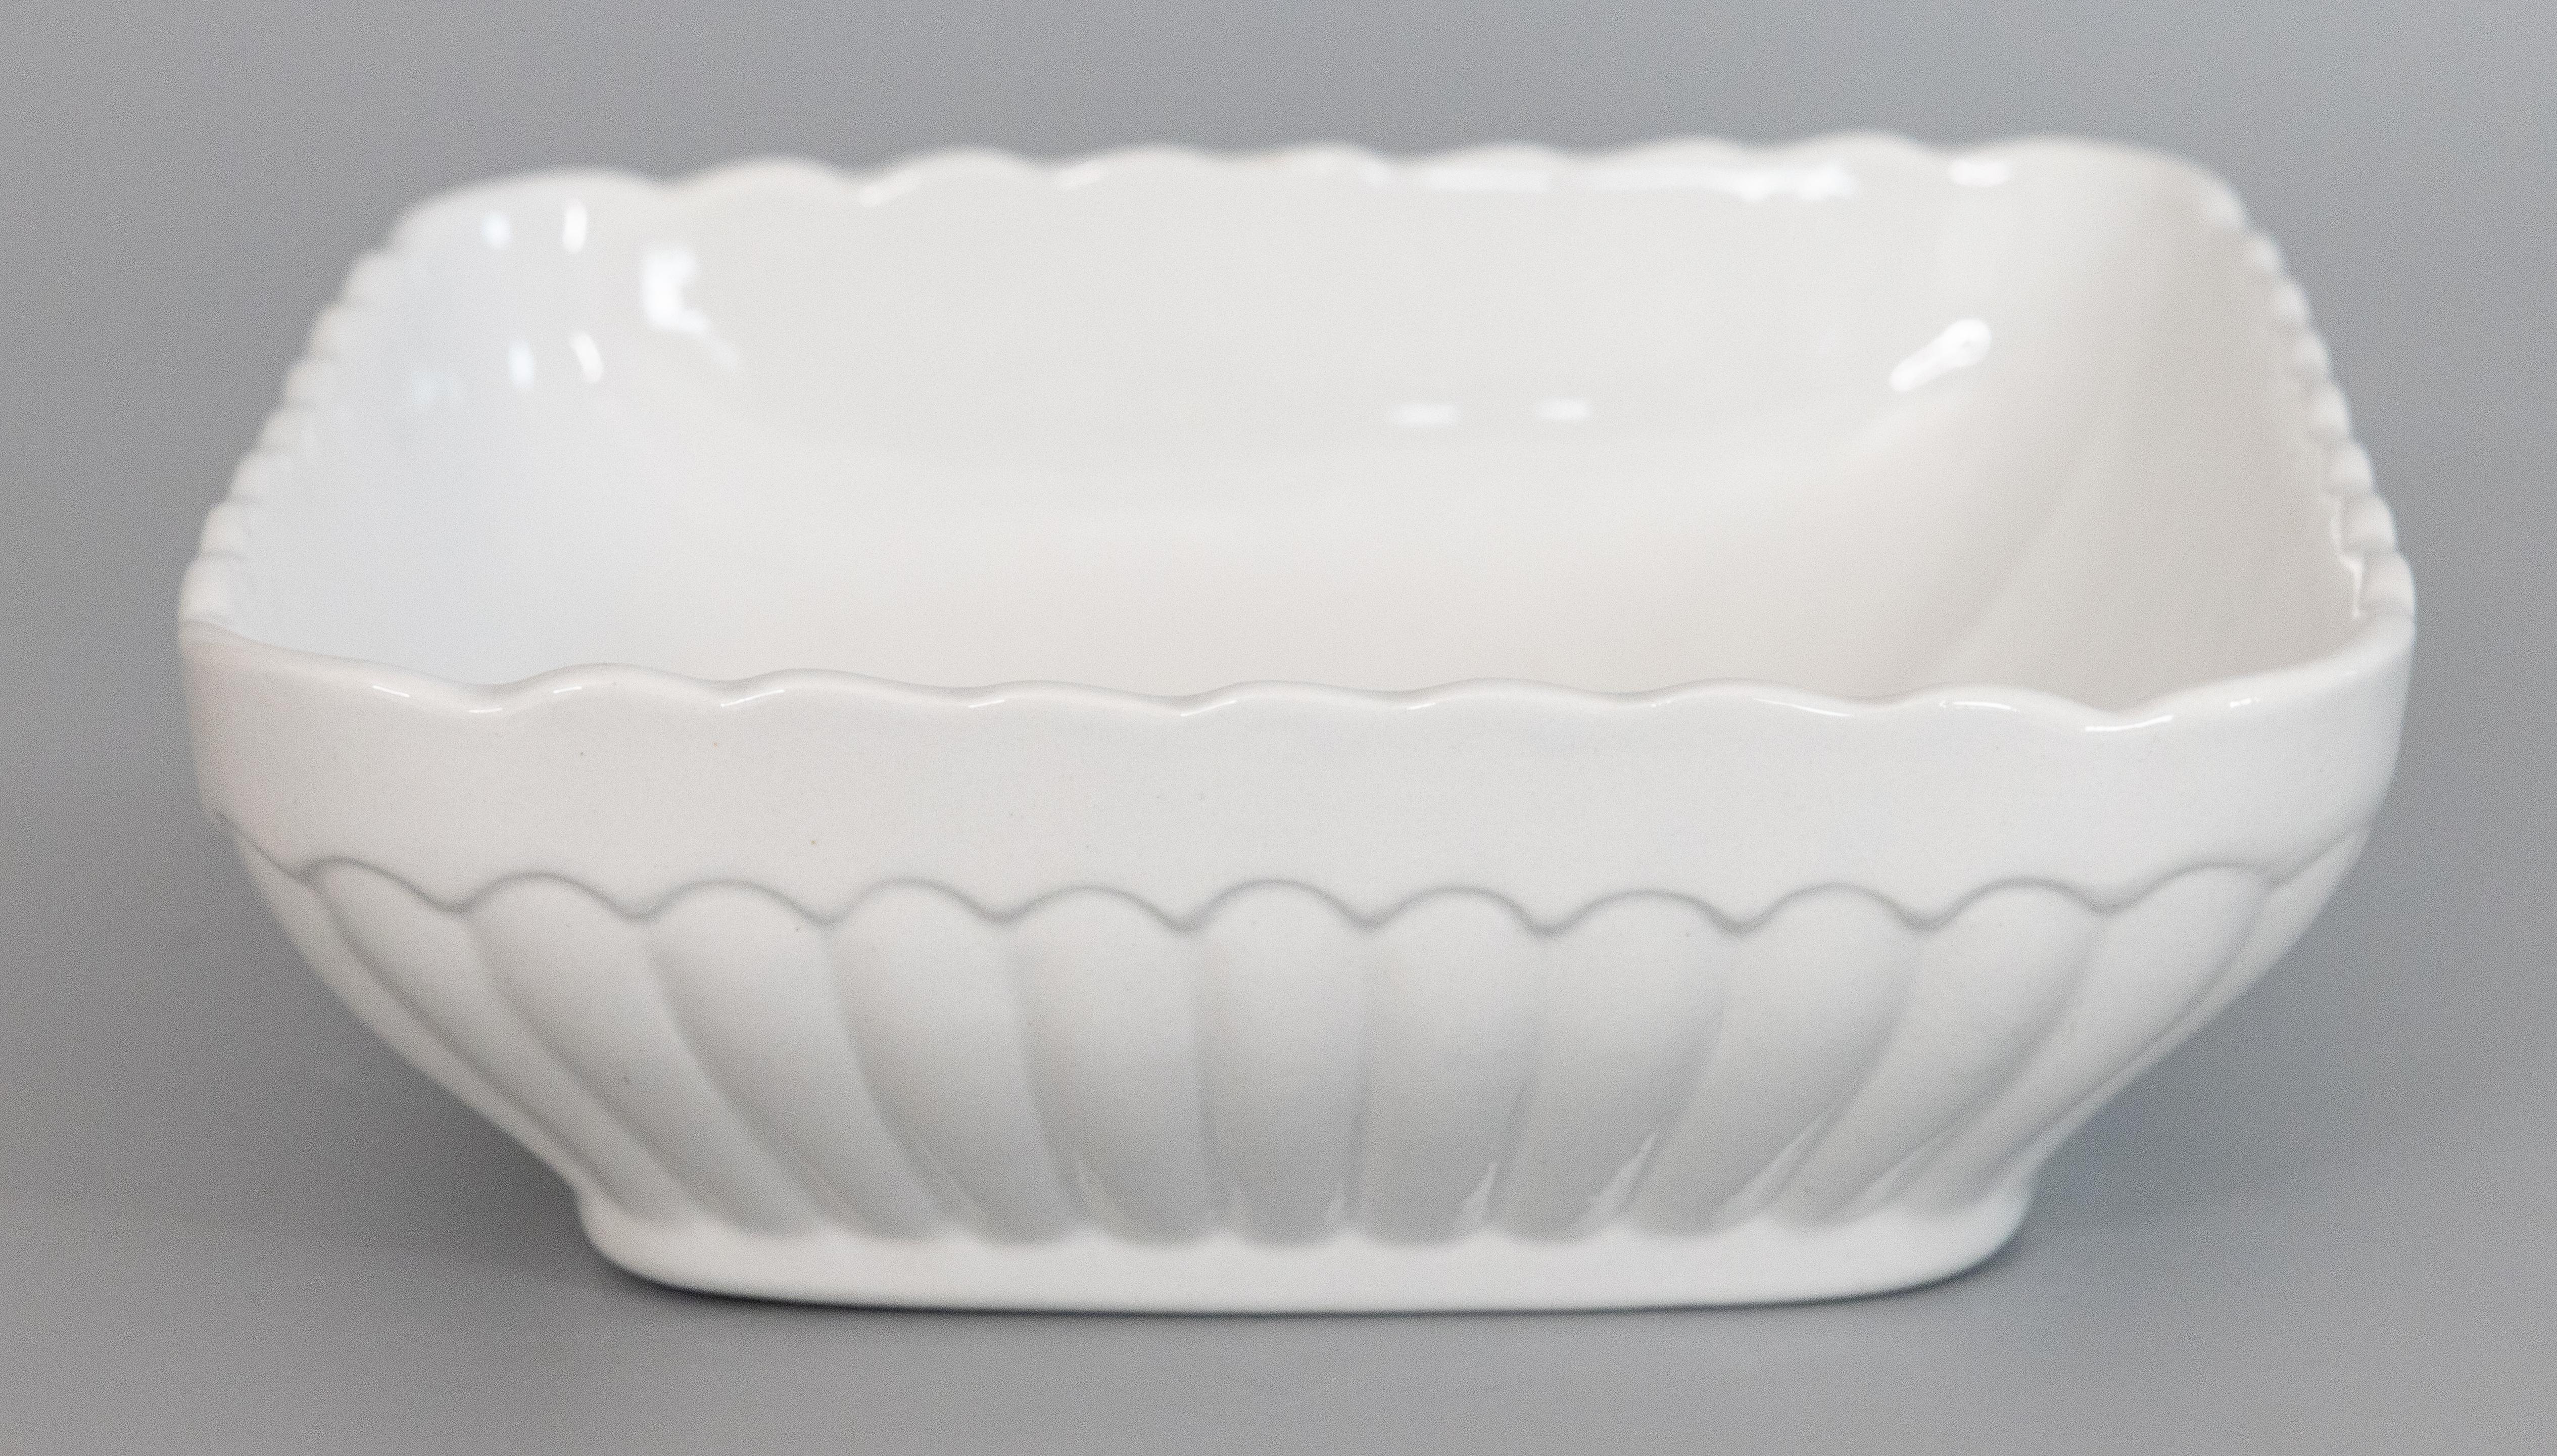 A beautiful antique English white ironstone bowl with a lovely fluted design, circa 1890. Maker's mark on reverse. This would be a wonderful addition to an ironstone collection and would look fabulous filled with fruit or other decorative objects.